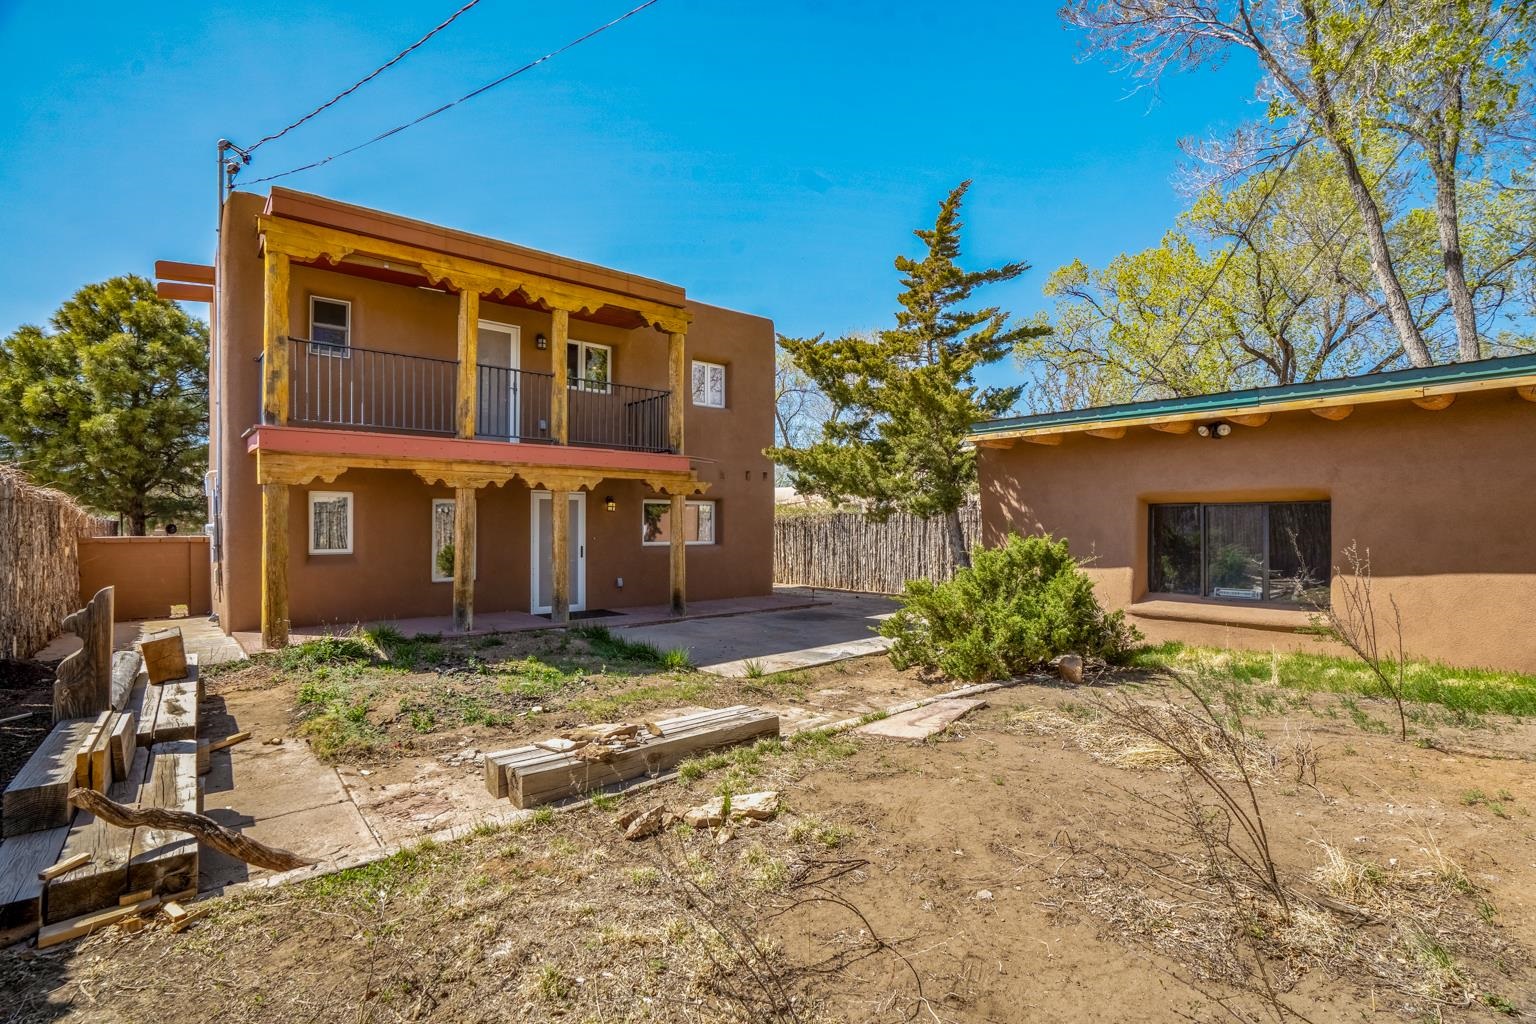 617 Onate, Santa Fe, New Mexico 87505, 2 Bedrooms Bedrooms, ,2 BathroomsBathrooms,Residential,For Sale,617 Onate,202201226